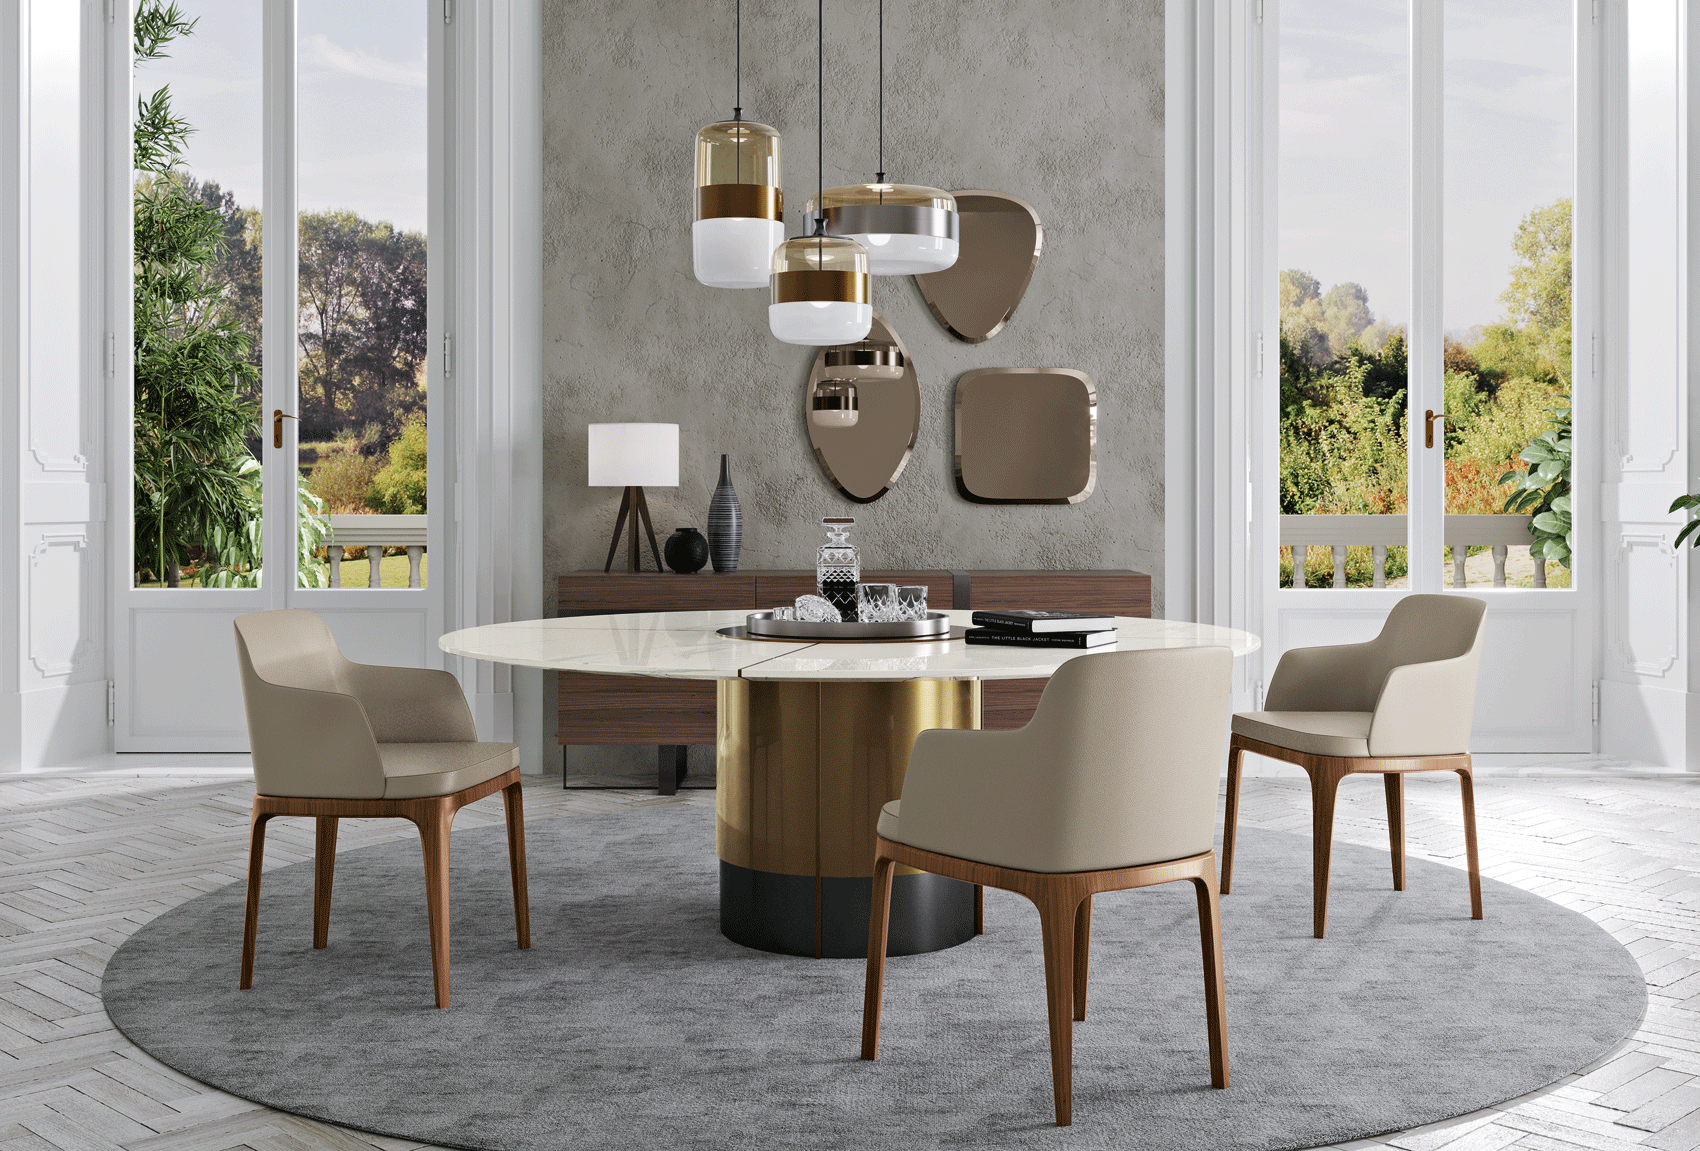 Dining Room Furniture Classic Dining Room Sets Leandro Dining Table with Sienna chairs